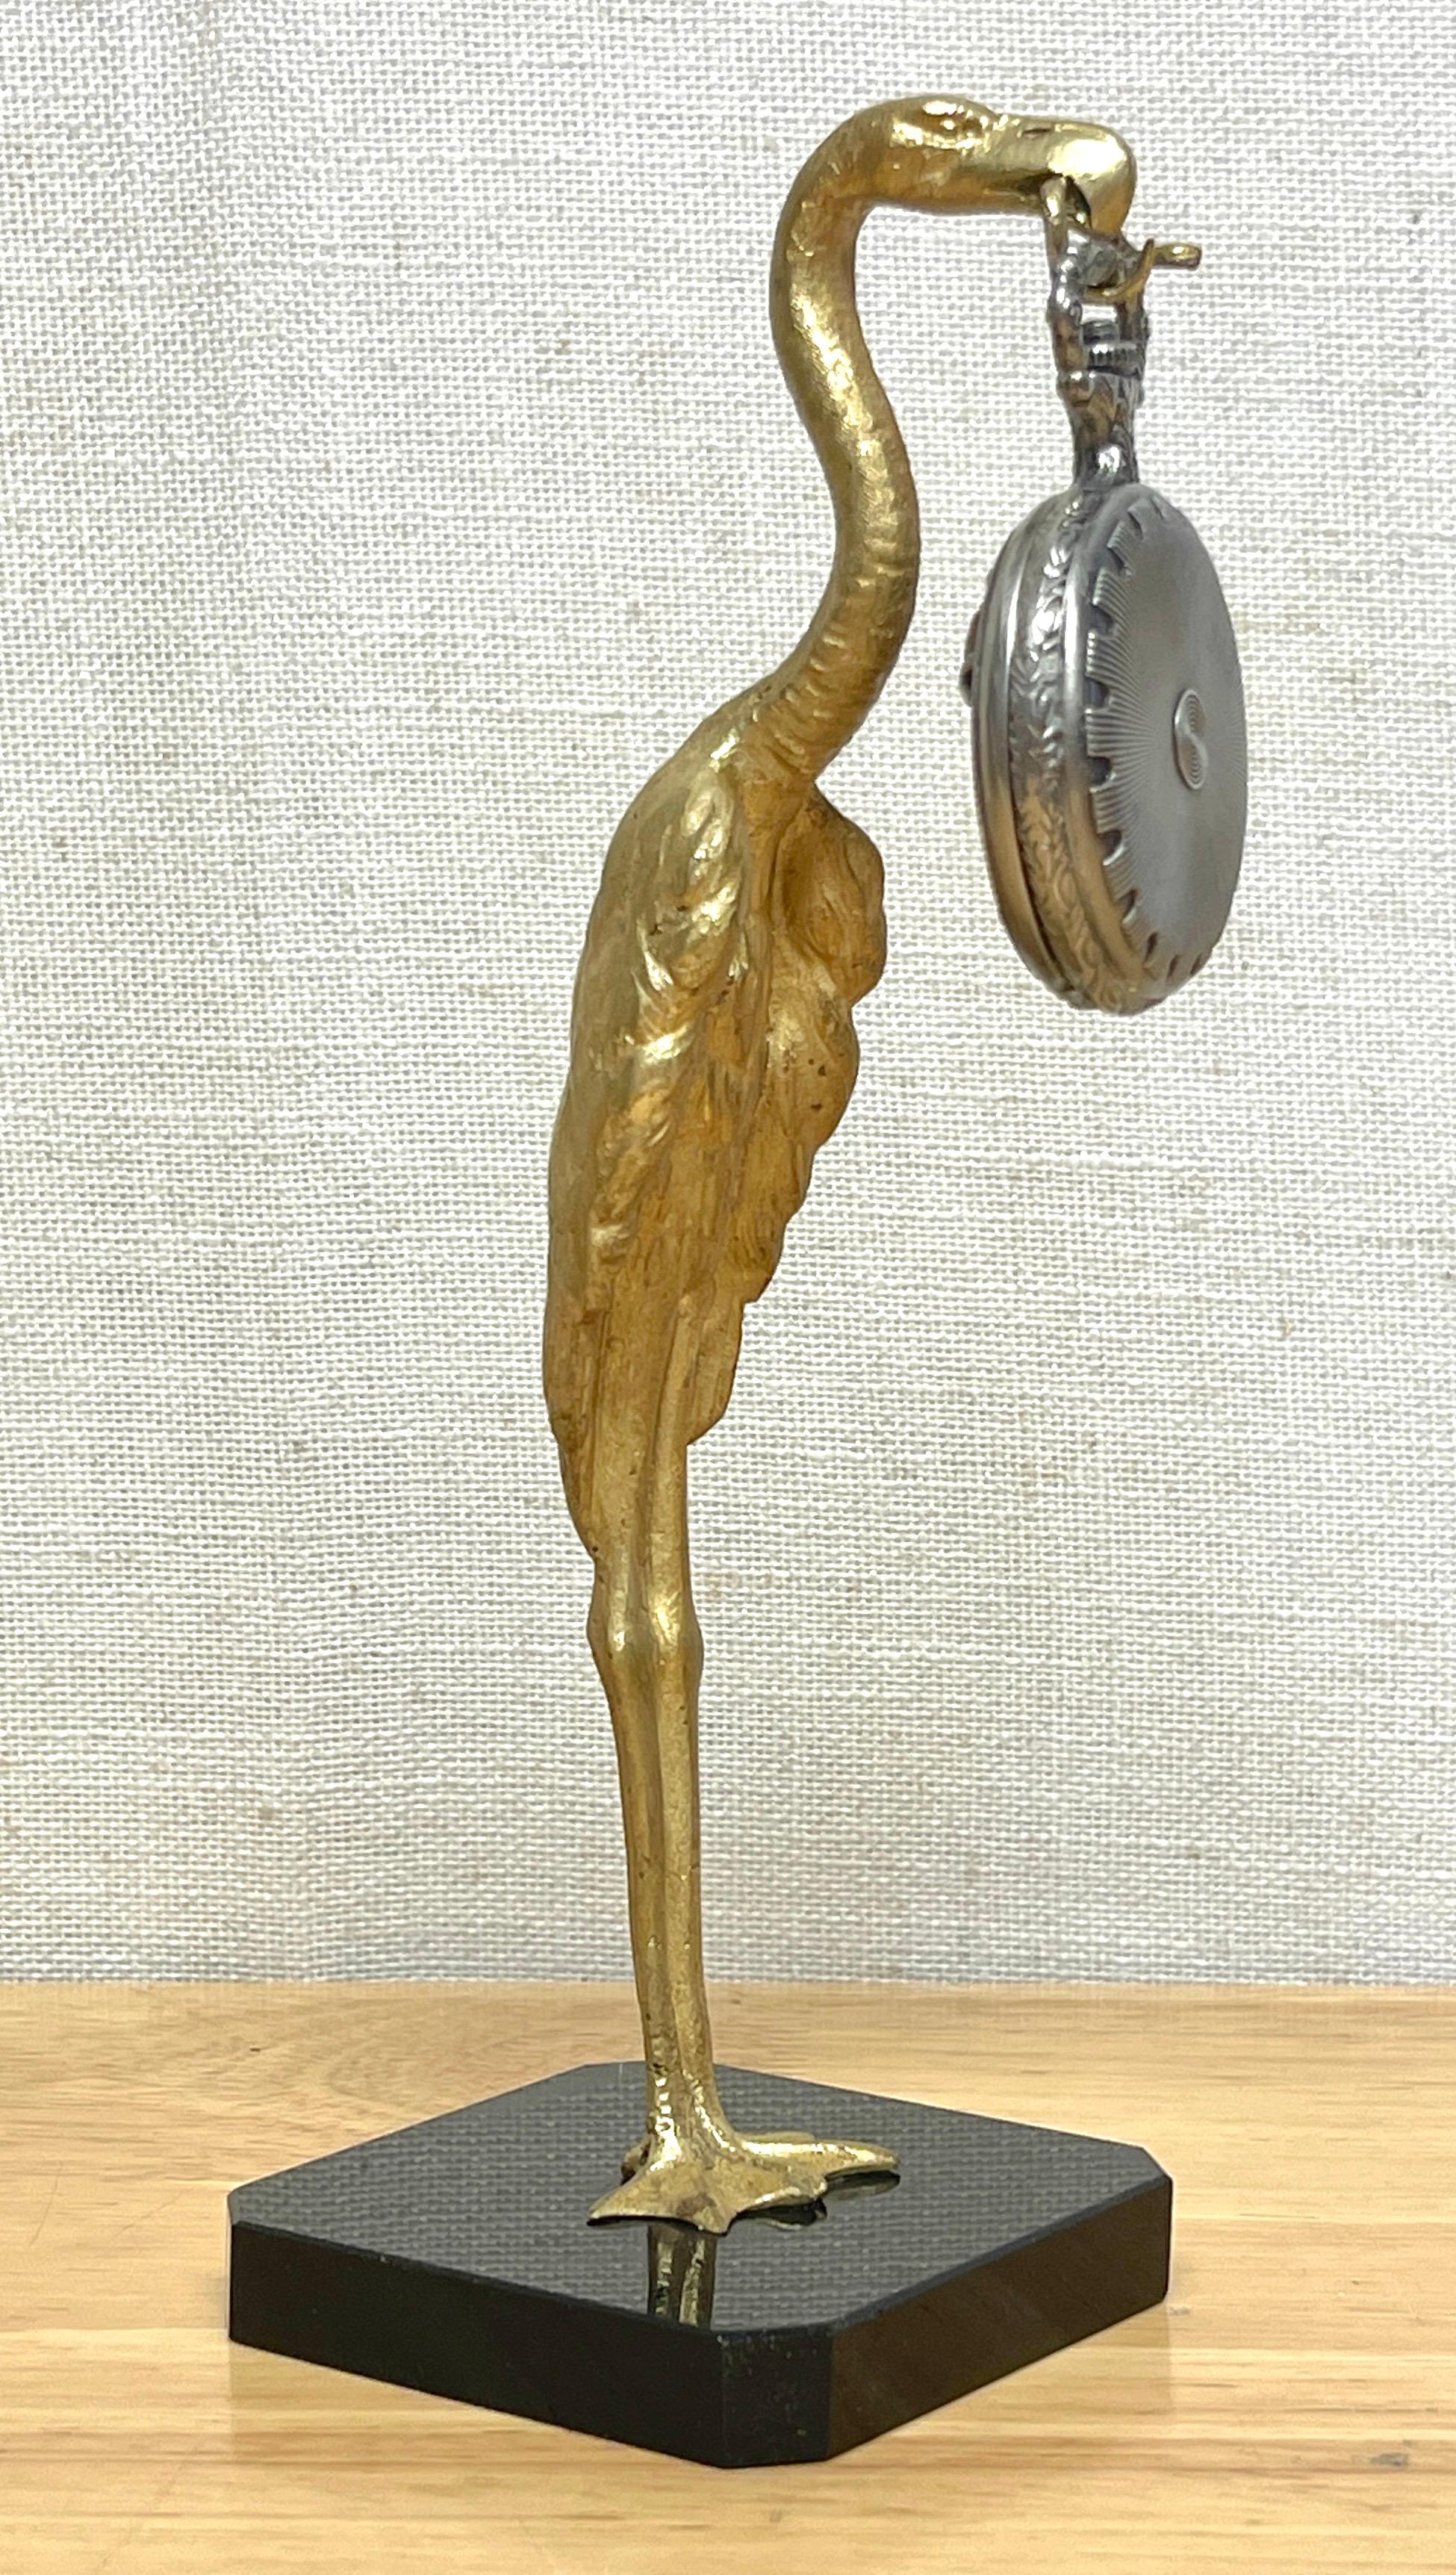 French Art Deco Gilt Bronze Standing Bird & Serpent Pocket Watch Holder
France, Circa 1920s
Realistically cast and modeled gilt bronze figure of a standing tall wading bird, Possibly holding a Flamingo or Stork, with a serpent in its mouth, which is